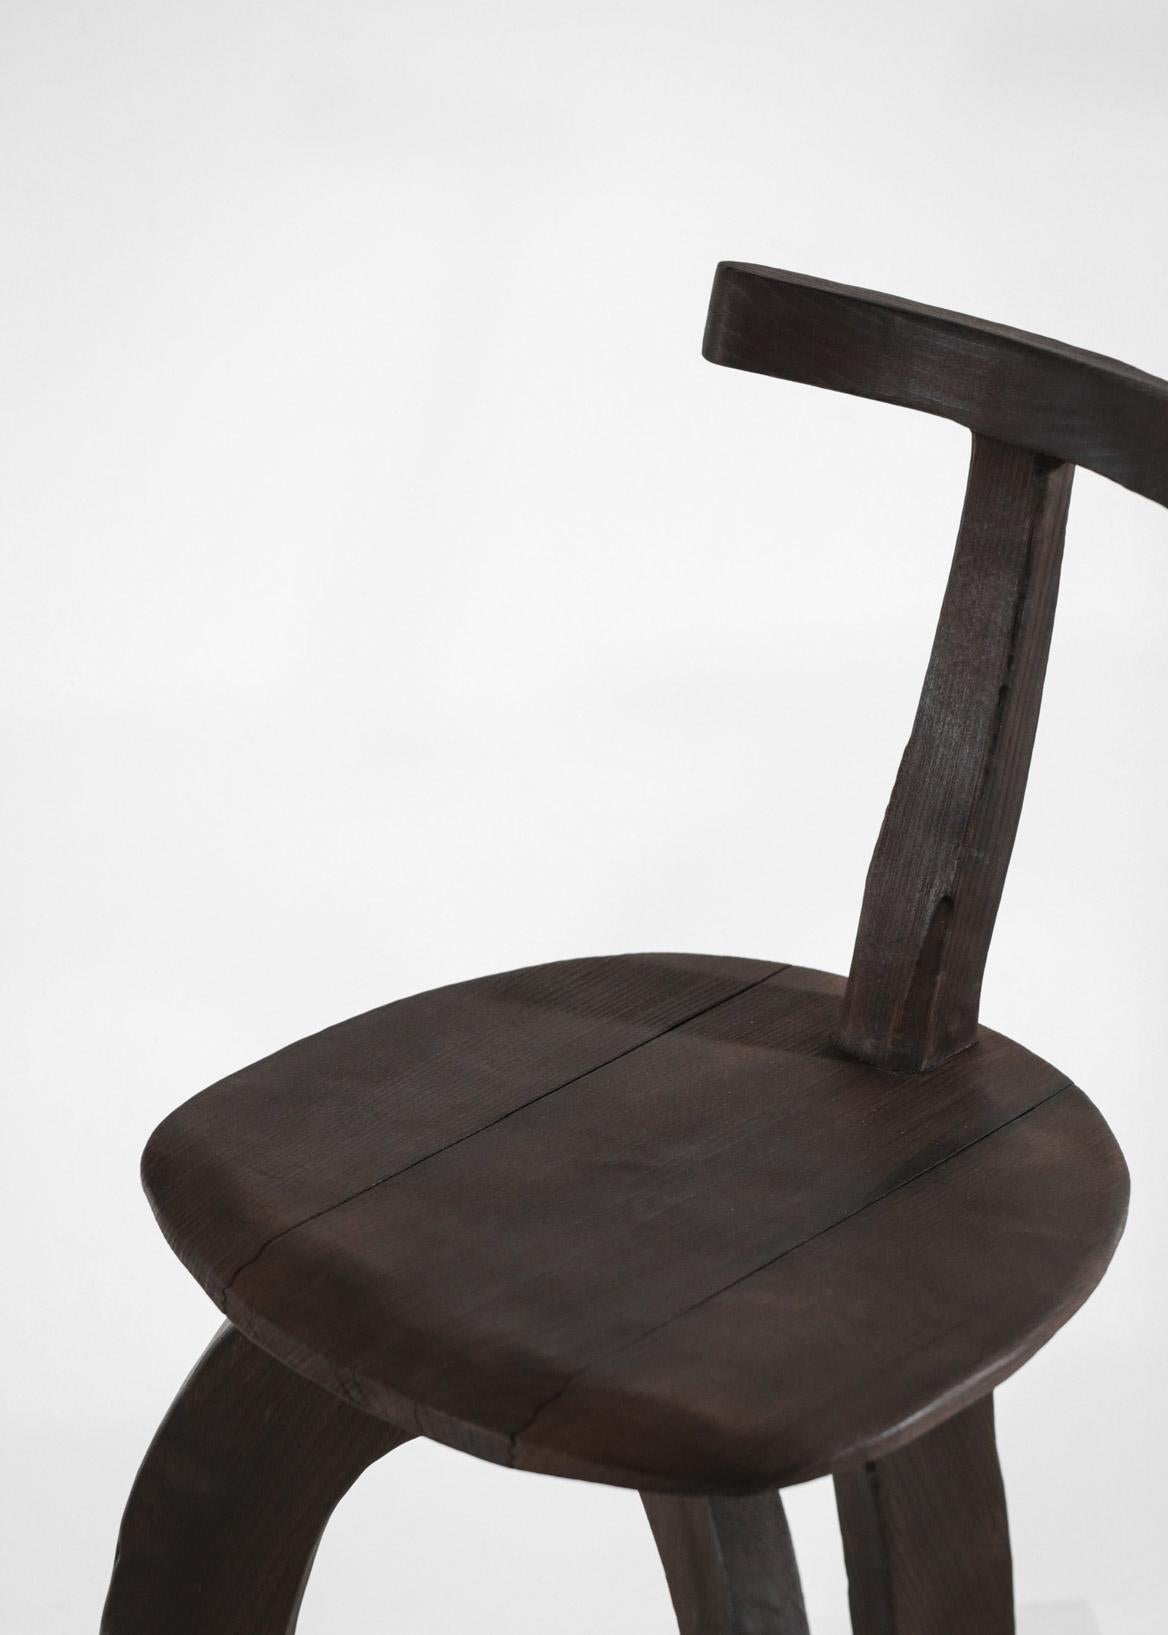 Contemporary Modern Handcrafted Wooden Chair 80/20 by Vincent Vincent olavi hanninen perriand For Sale